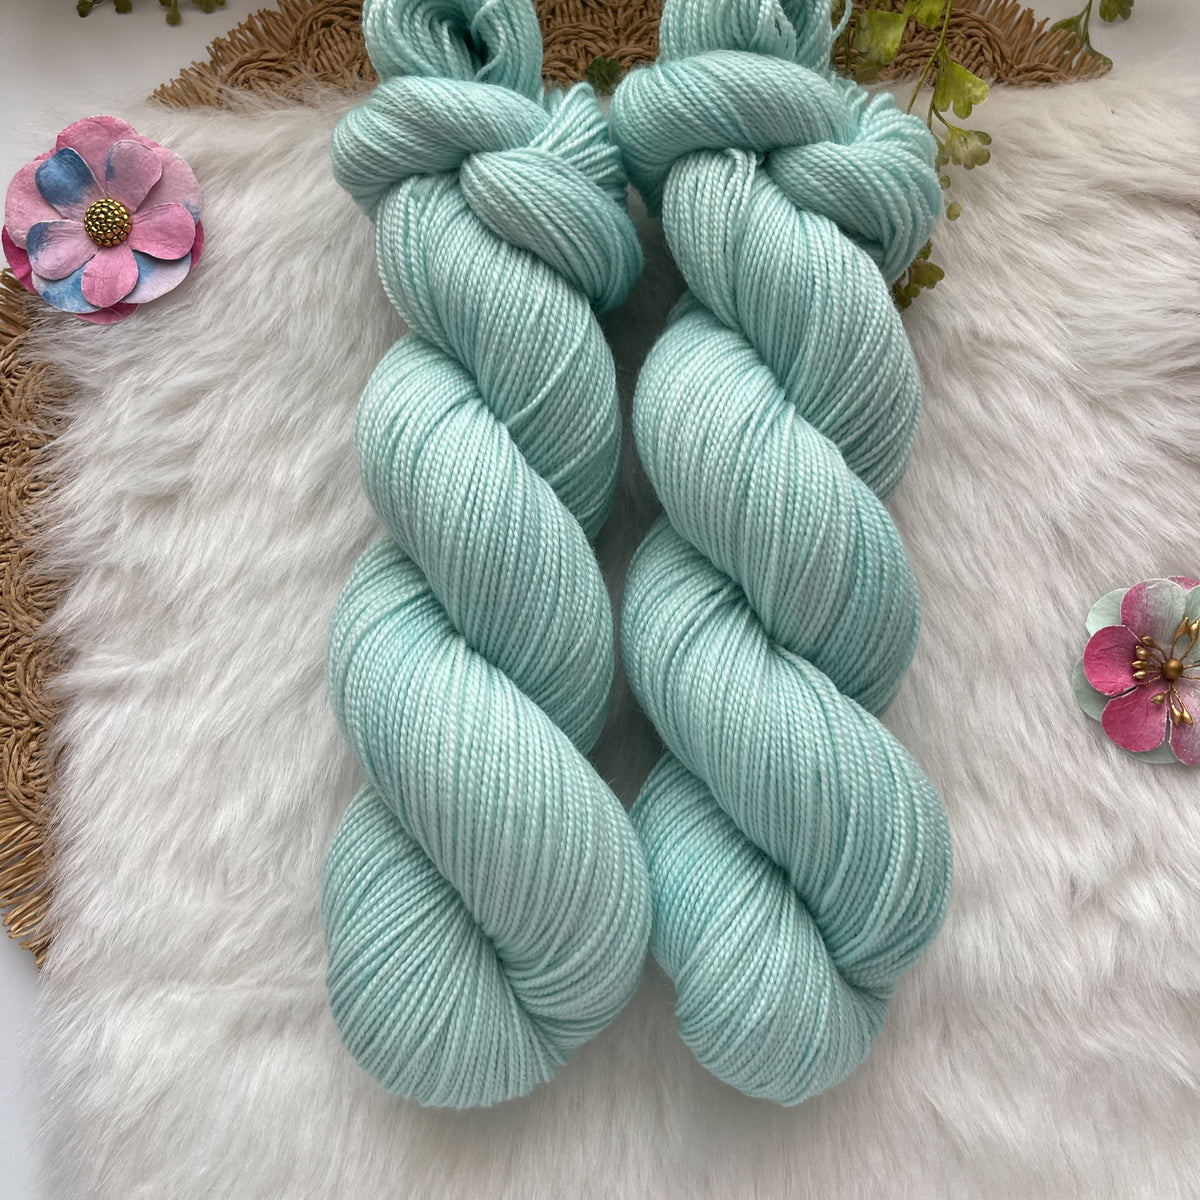 DELIGHT  -Dyed to Order - Hand Dyed Yarn Skein